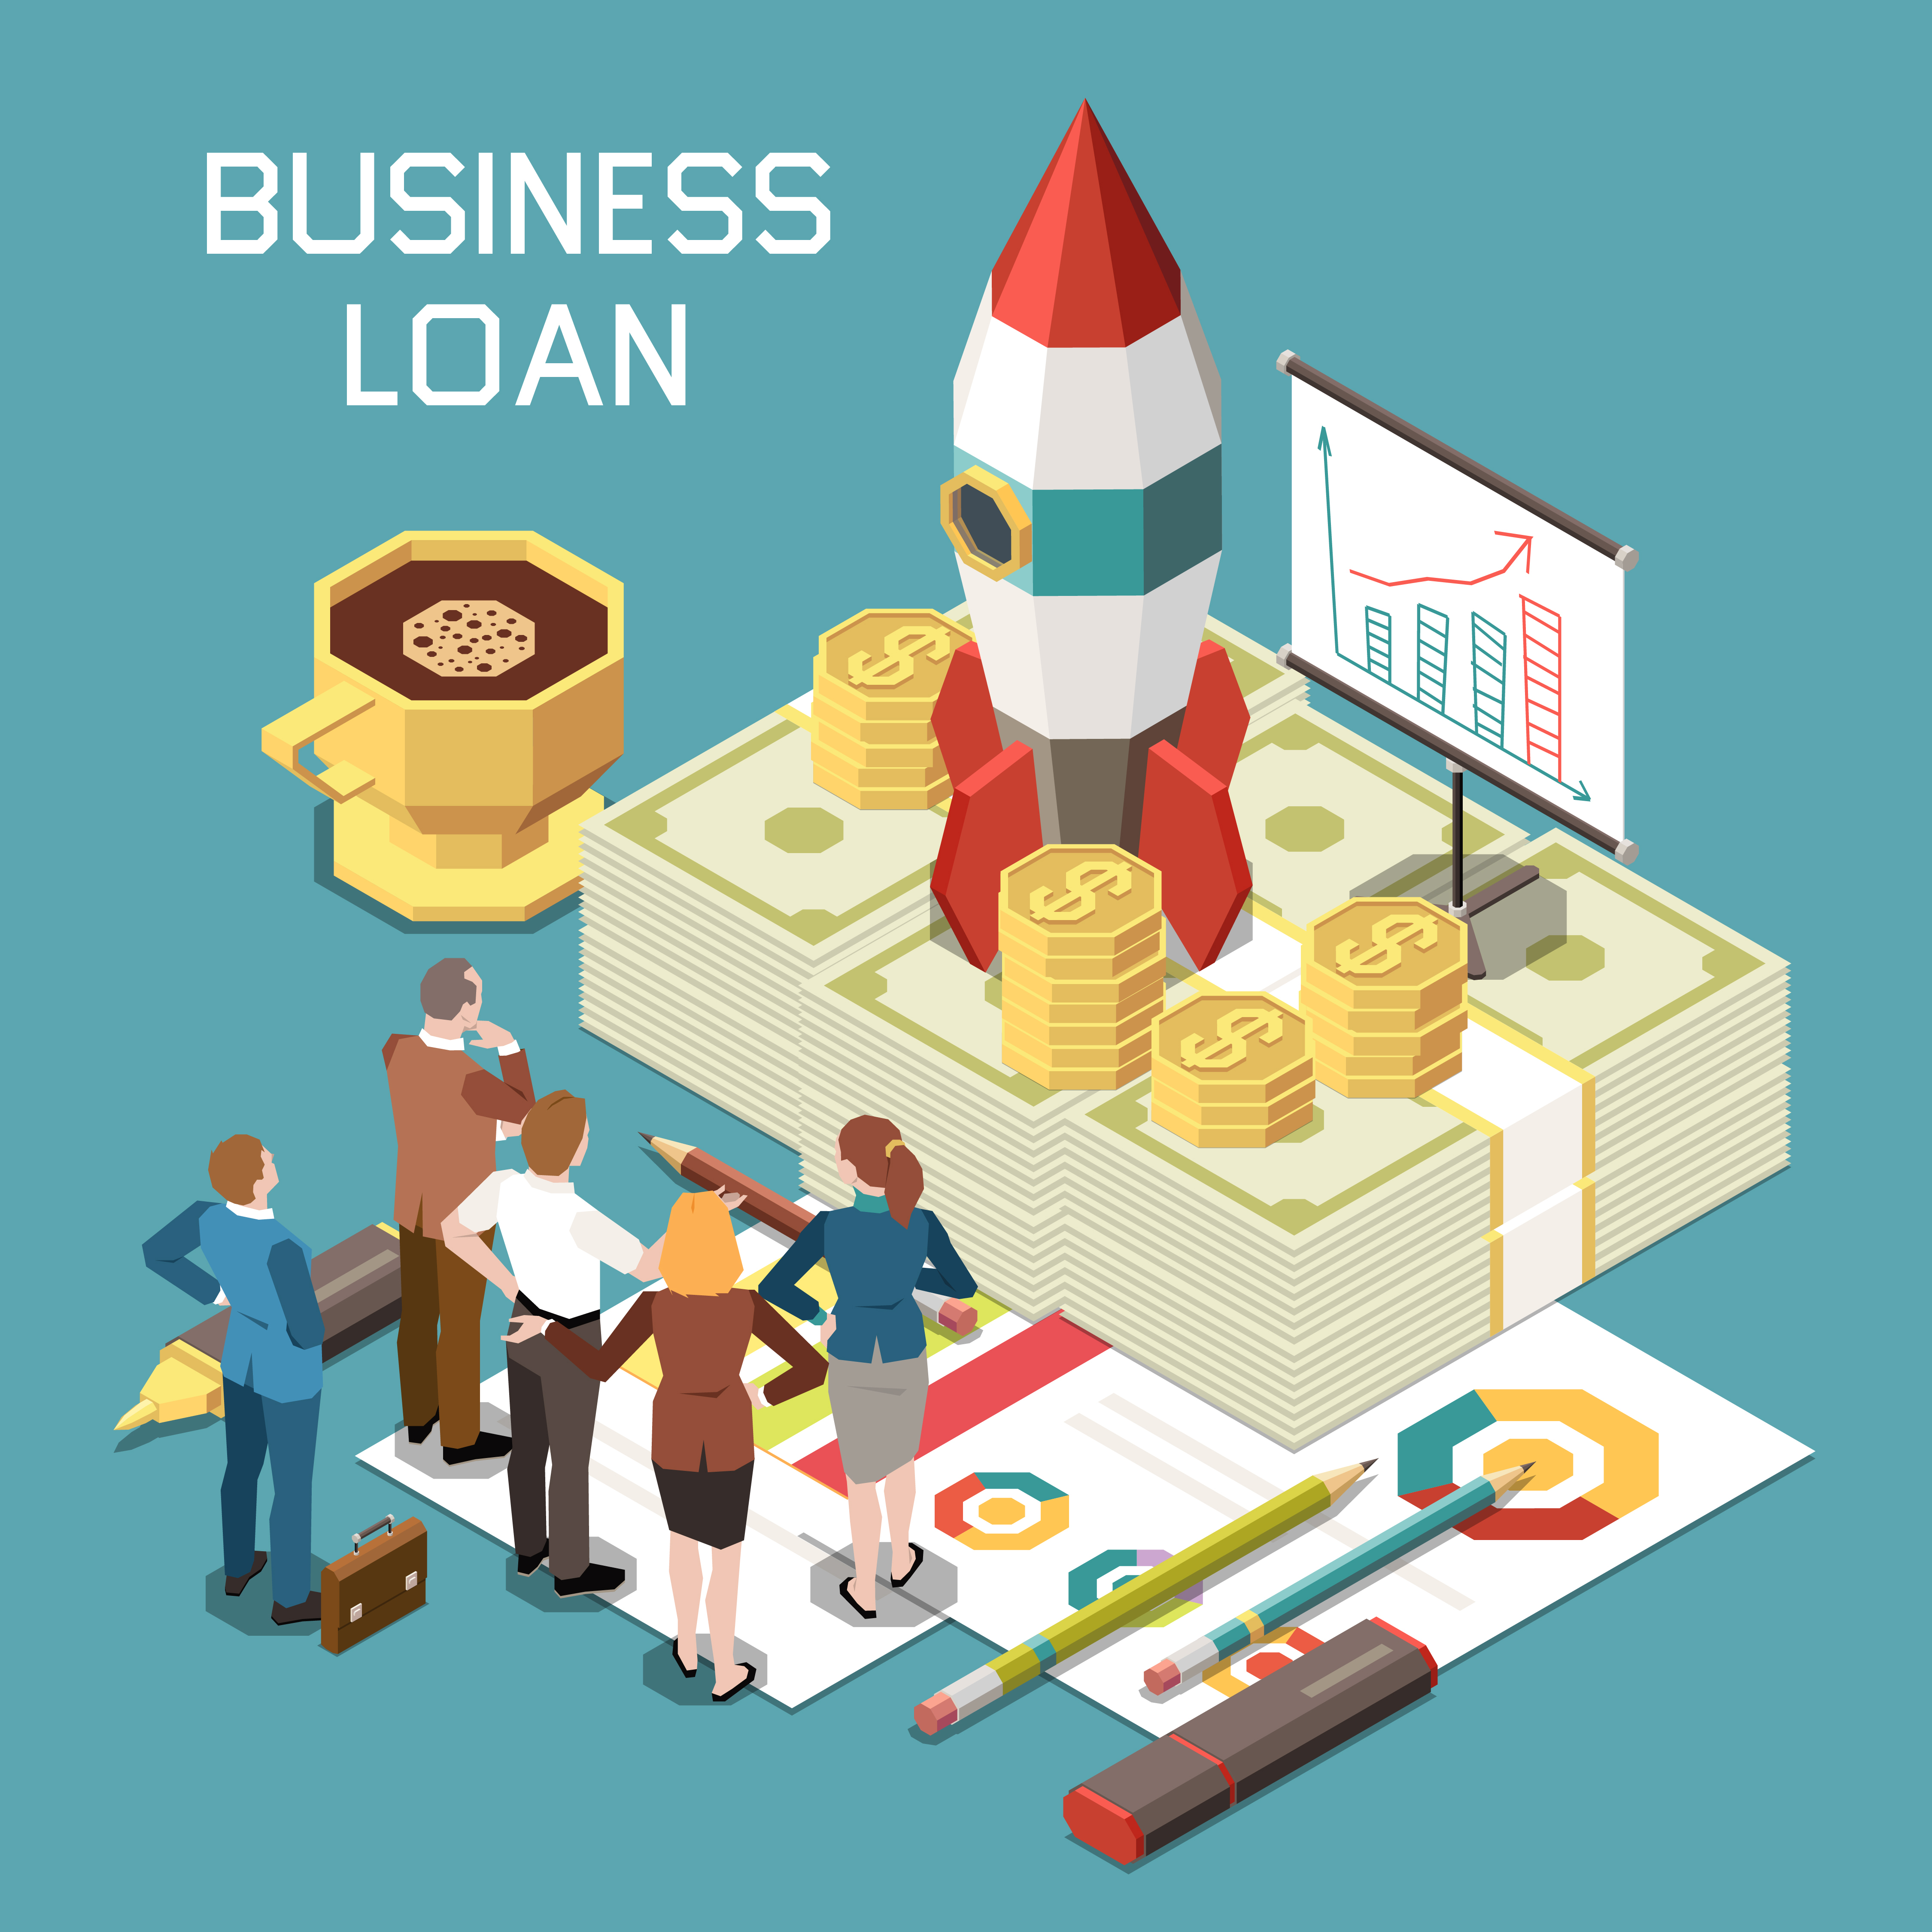 Personal Loan to Fund Your Small Business